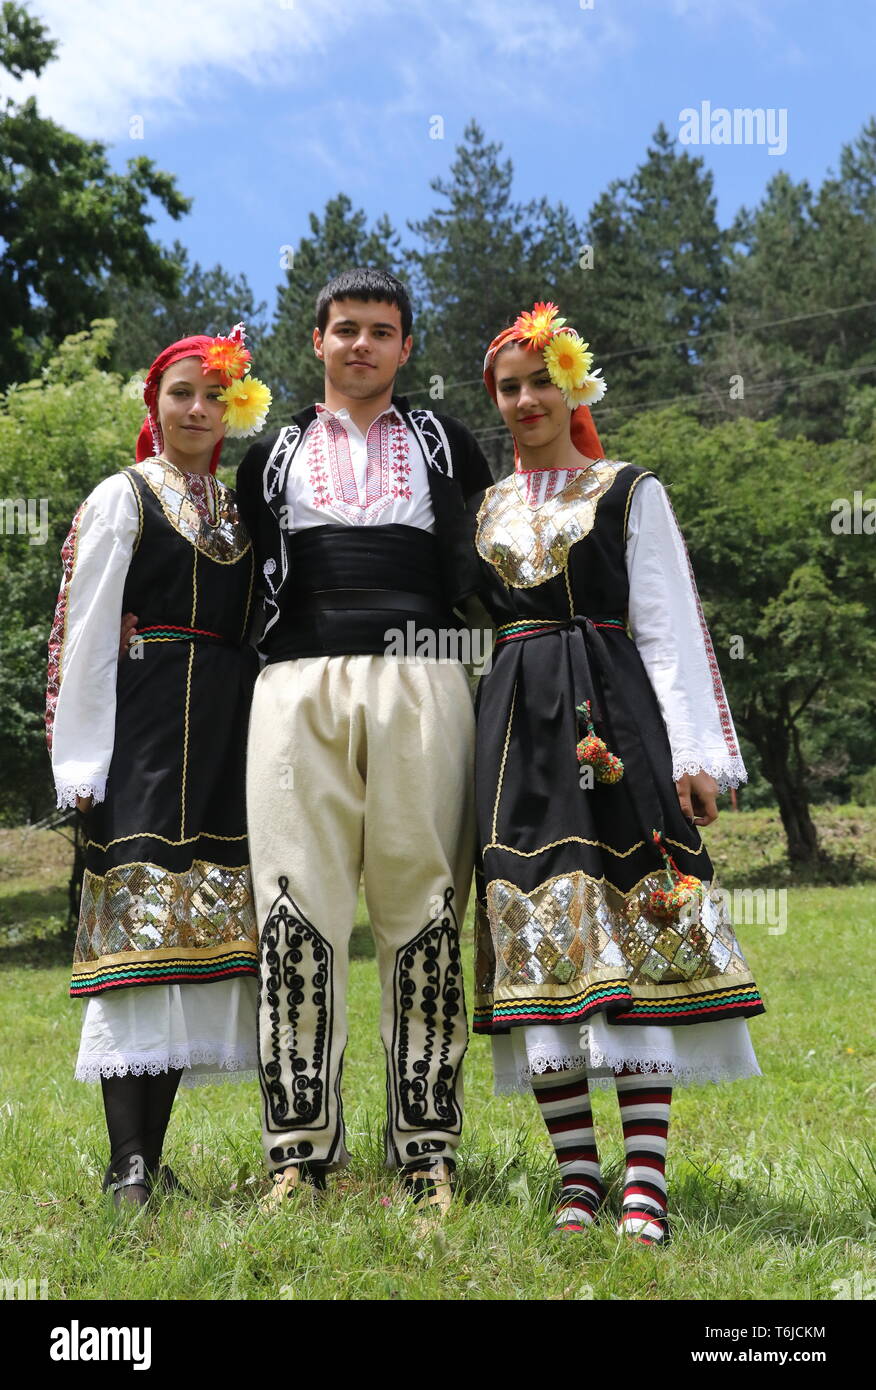 People in traditional authentic folk costumes Stock Photo